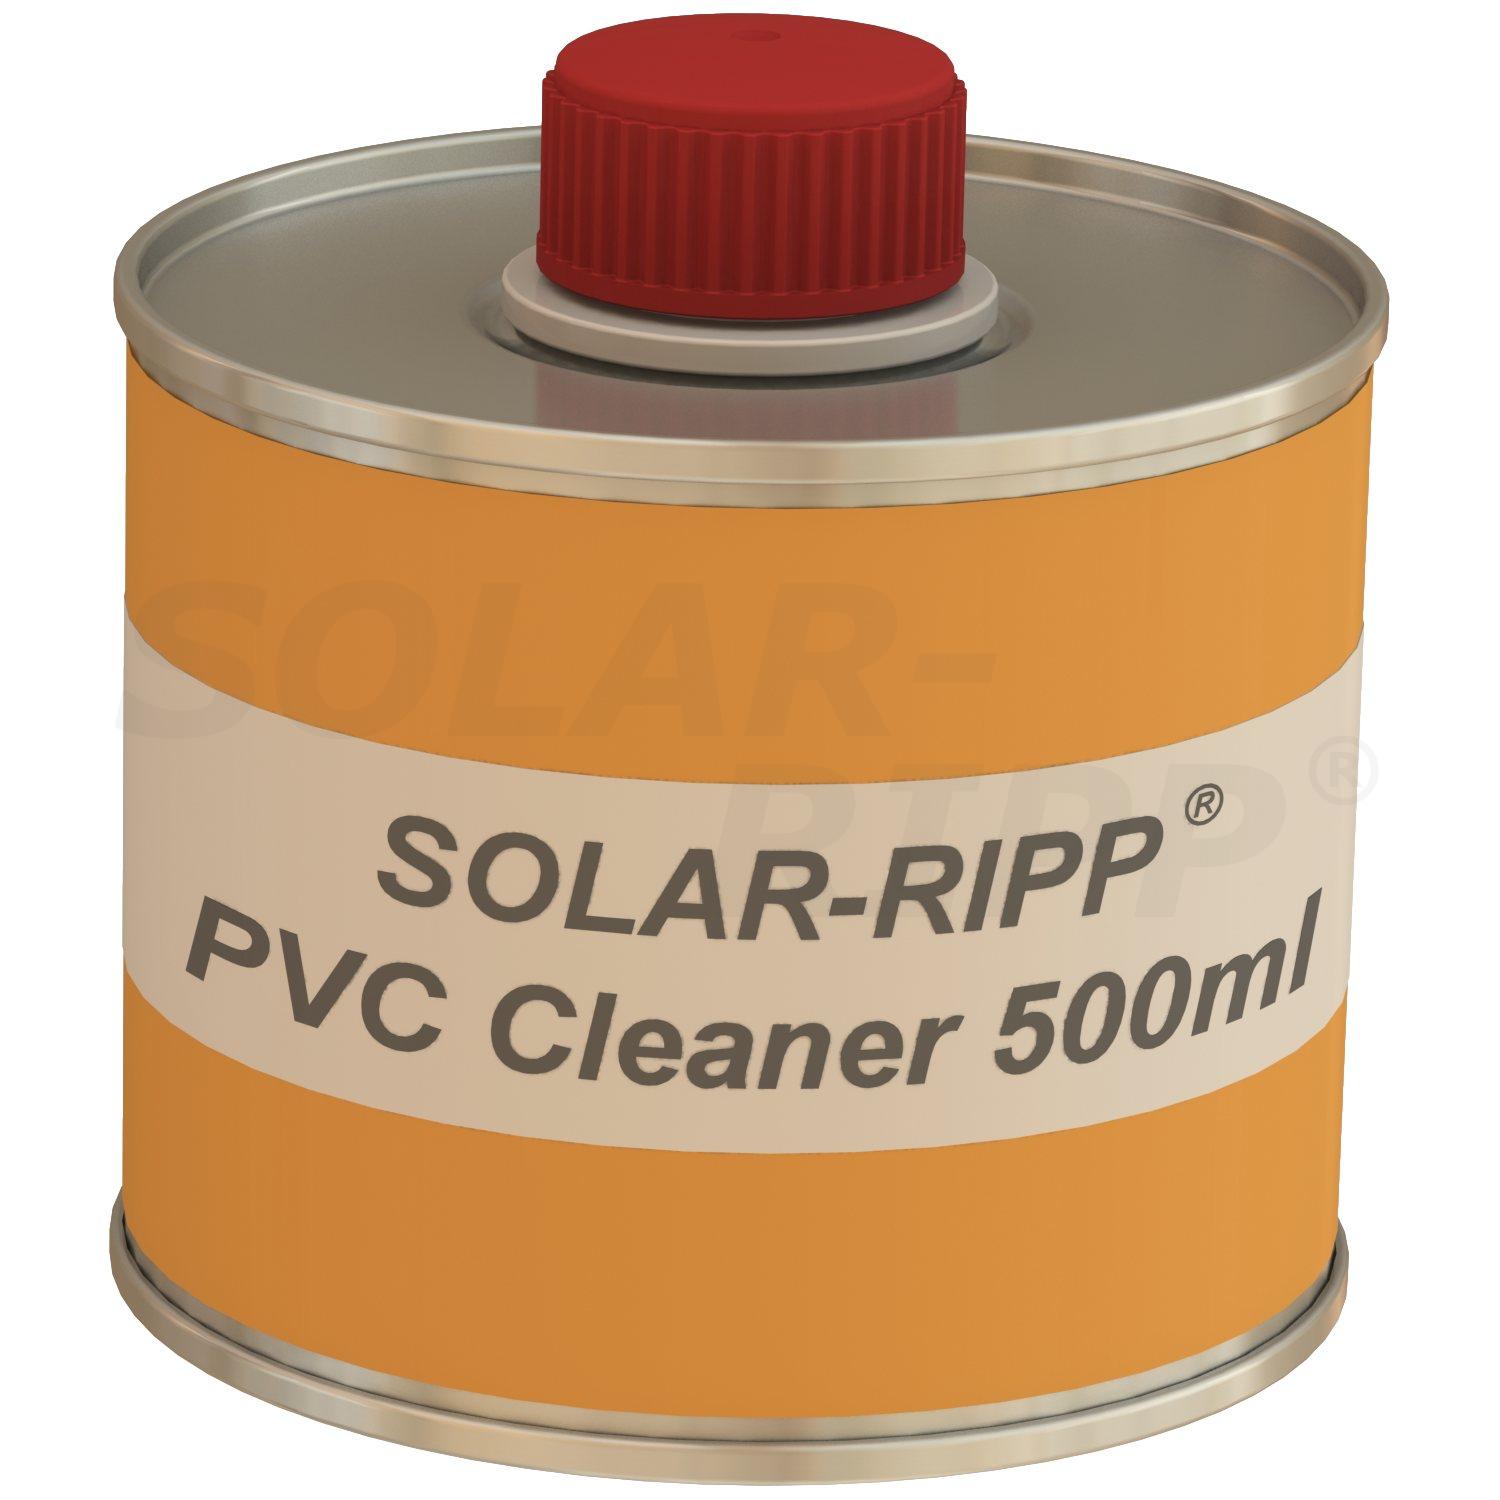 PVC cleaner (500ml can)